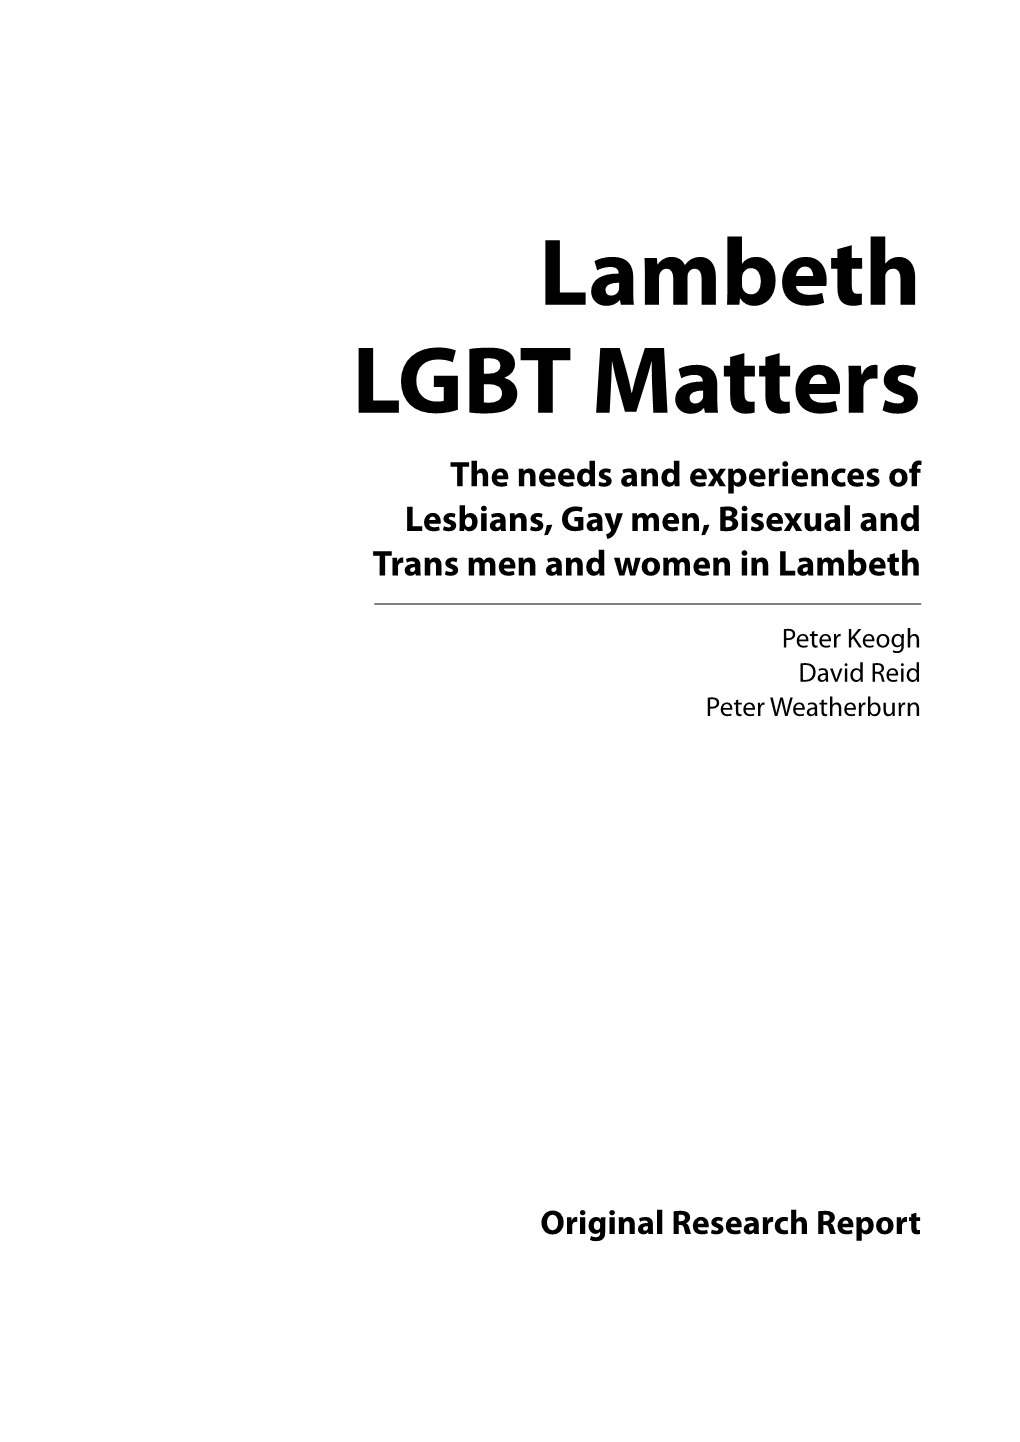 Lambeth LGBT Matters the Needs and Experiences of Lesbians, Gay Men, Bisexual and Trans Men and Women in Lambeth